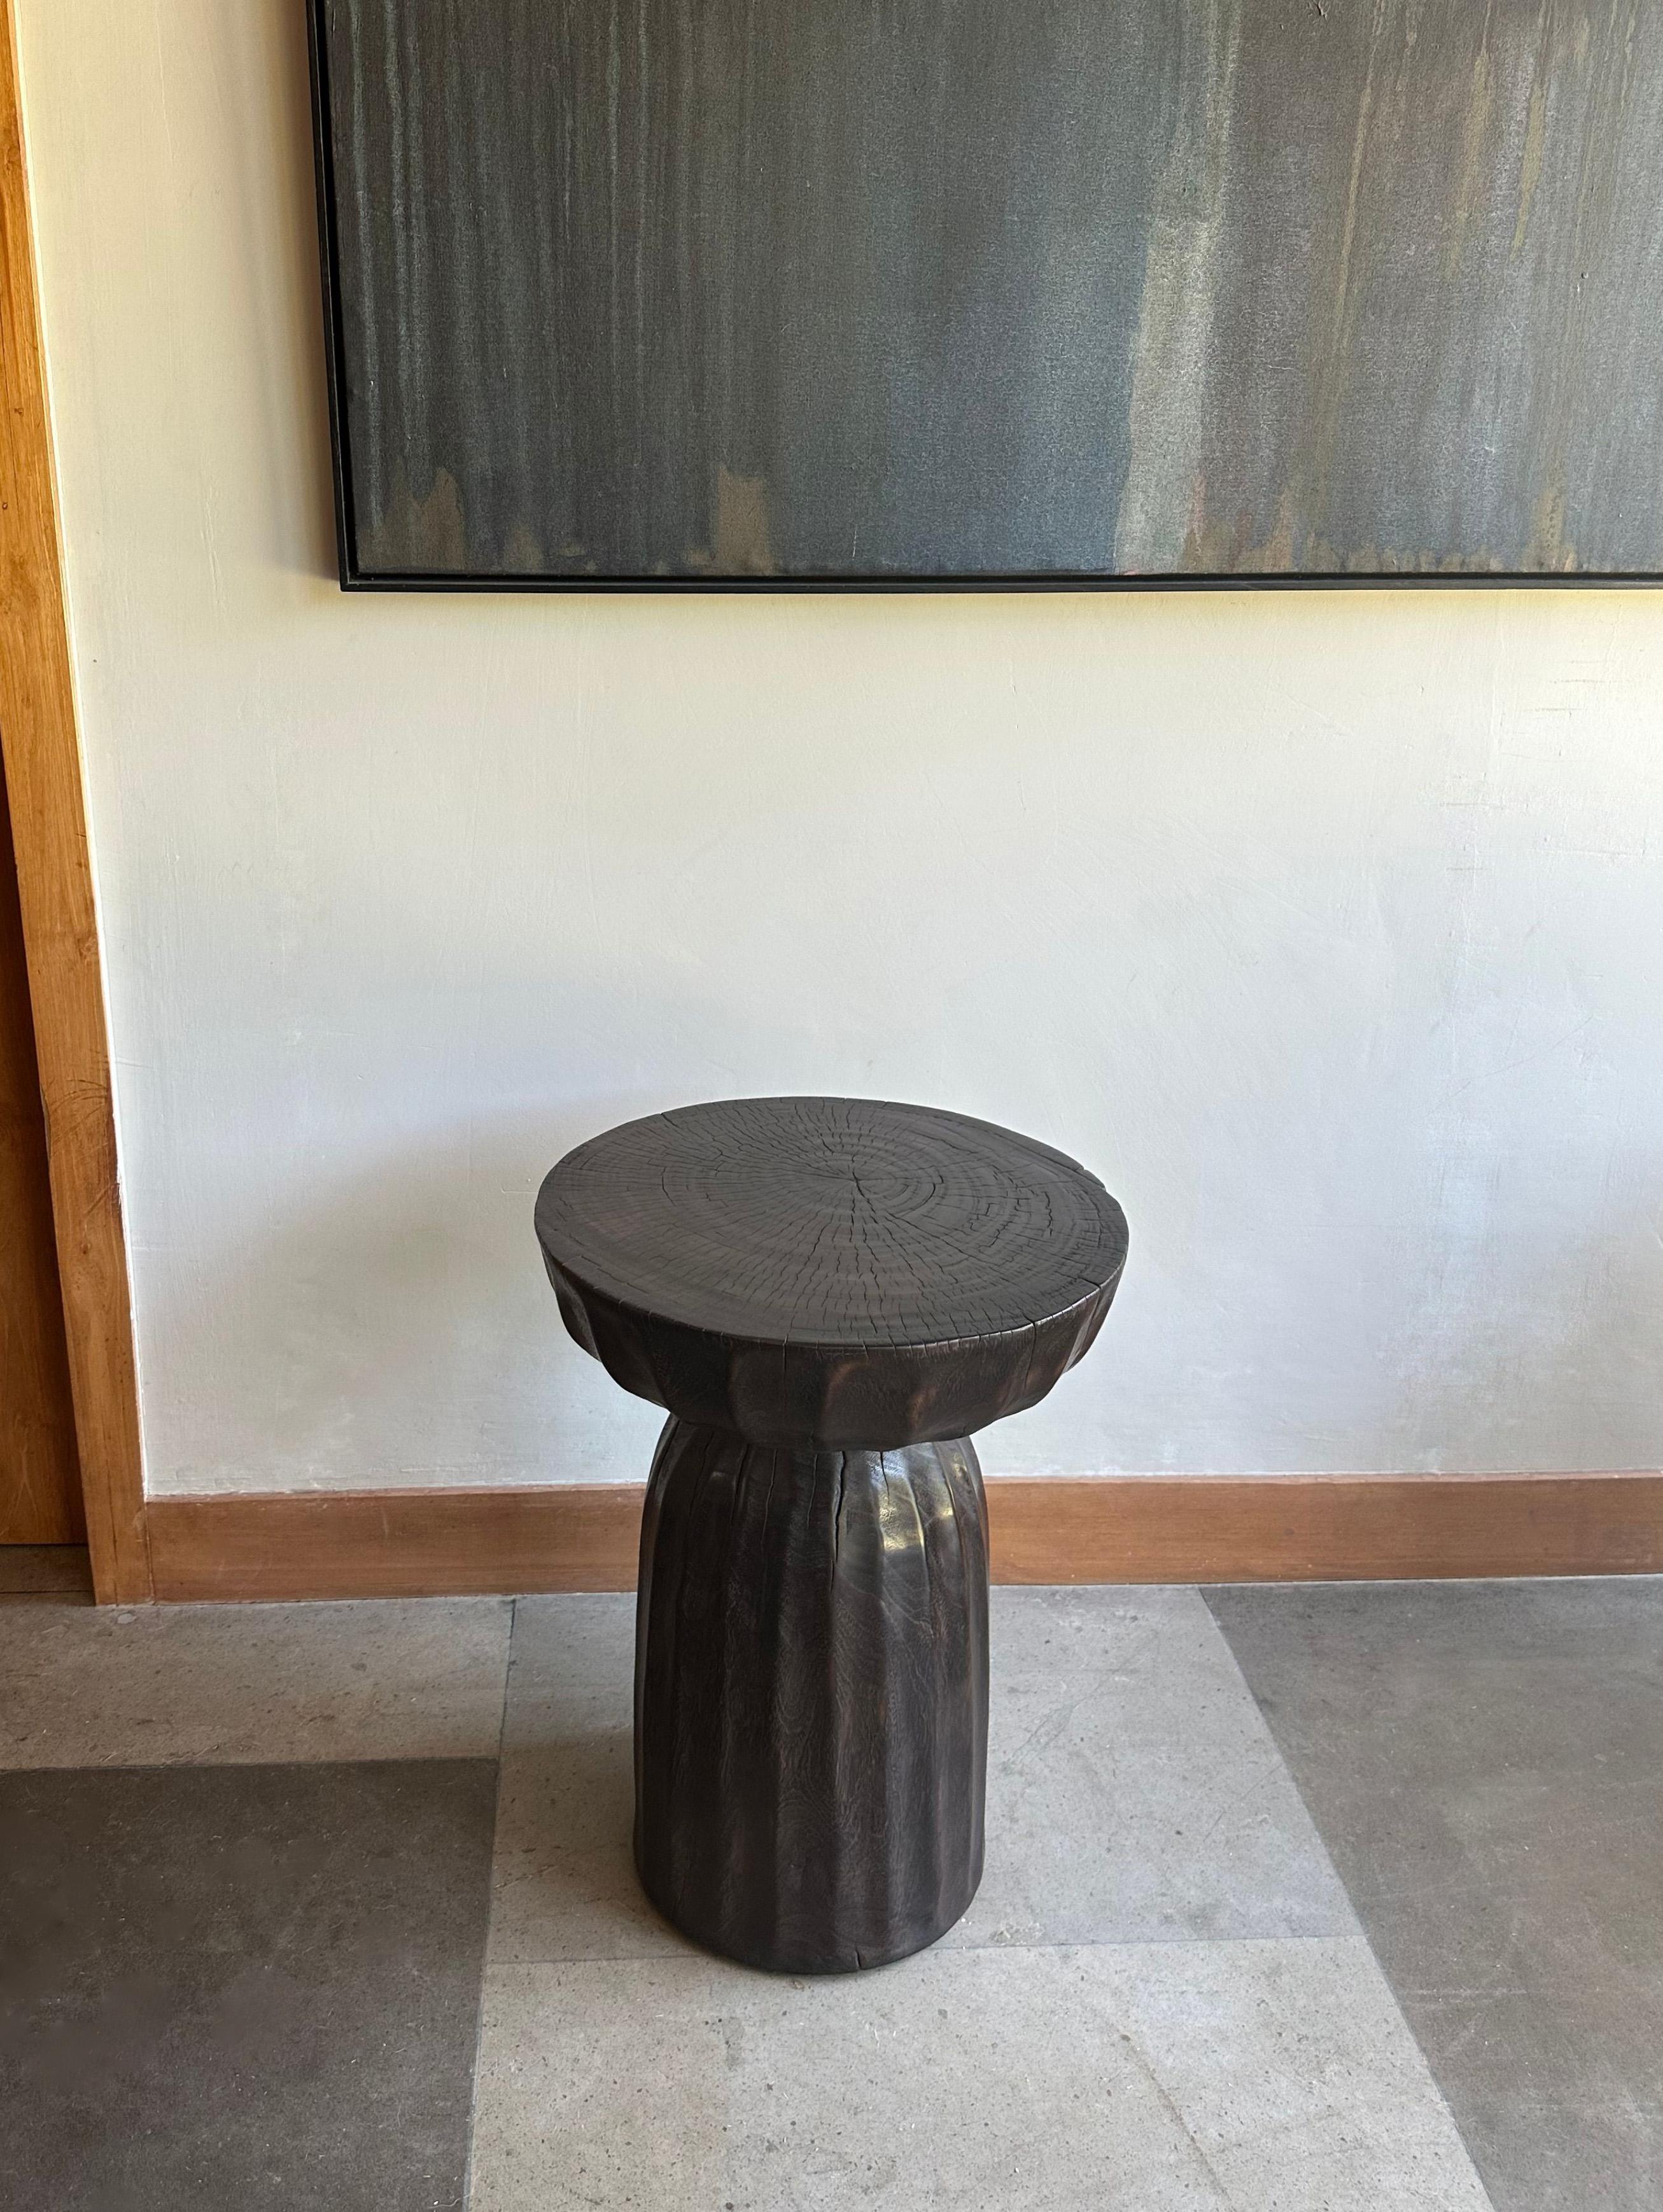 A wonderfully sculptural round side table, with an hourglass shape. Its neutral pigments make it perfect for any space. A uniquely sculptural and versatile piece certain to invoke conversation. It was crafted from a solid block of mango wood and has